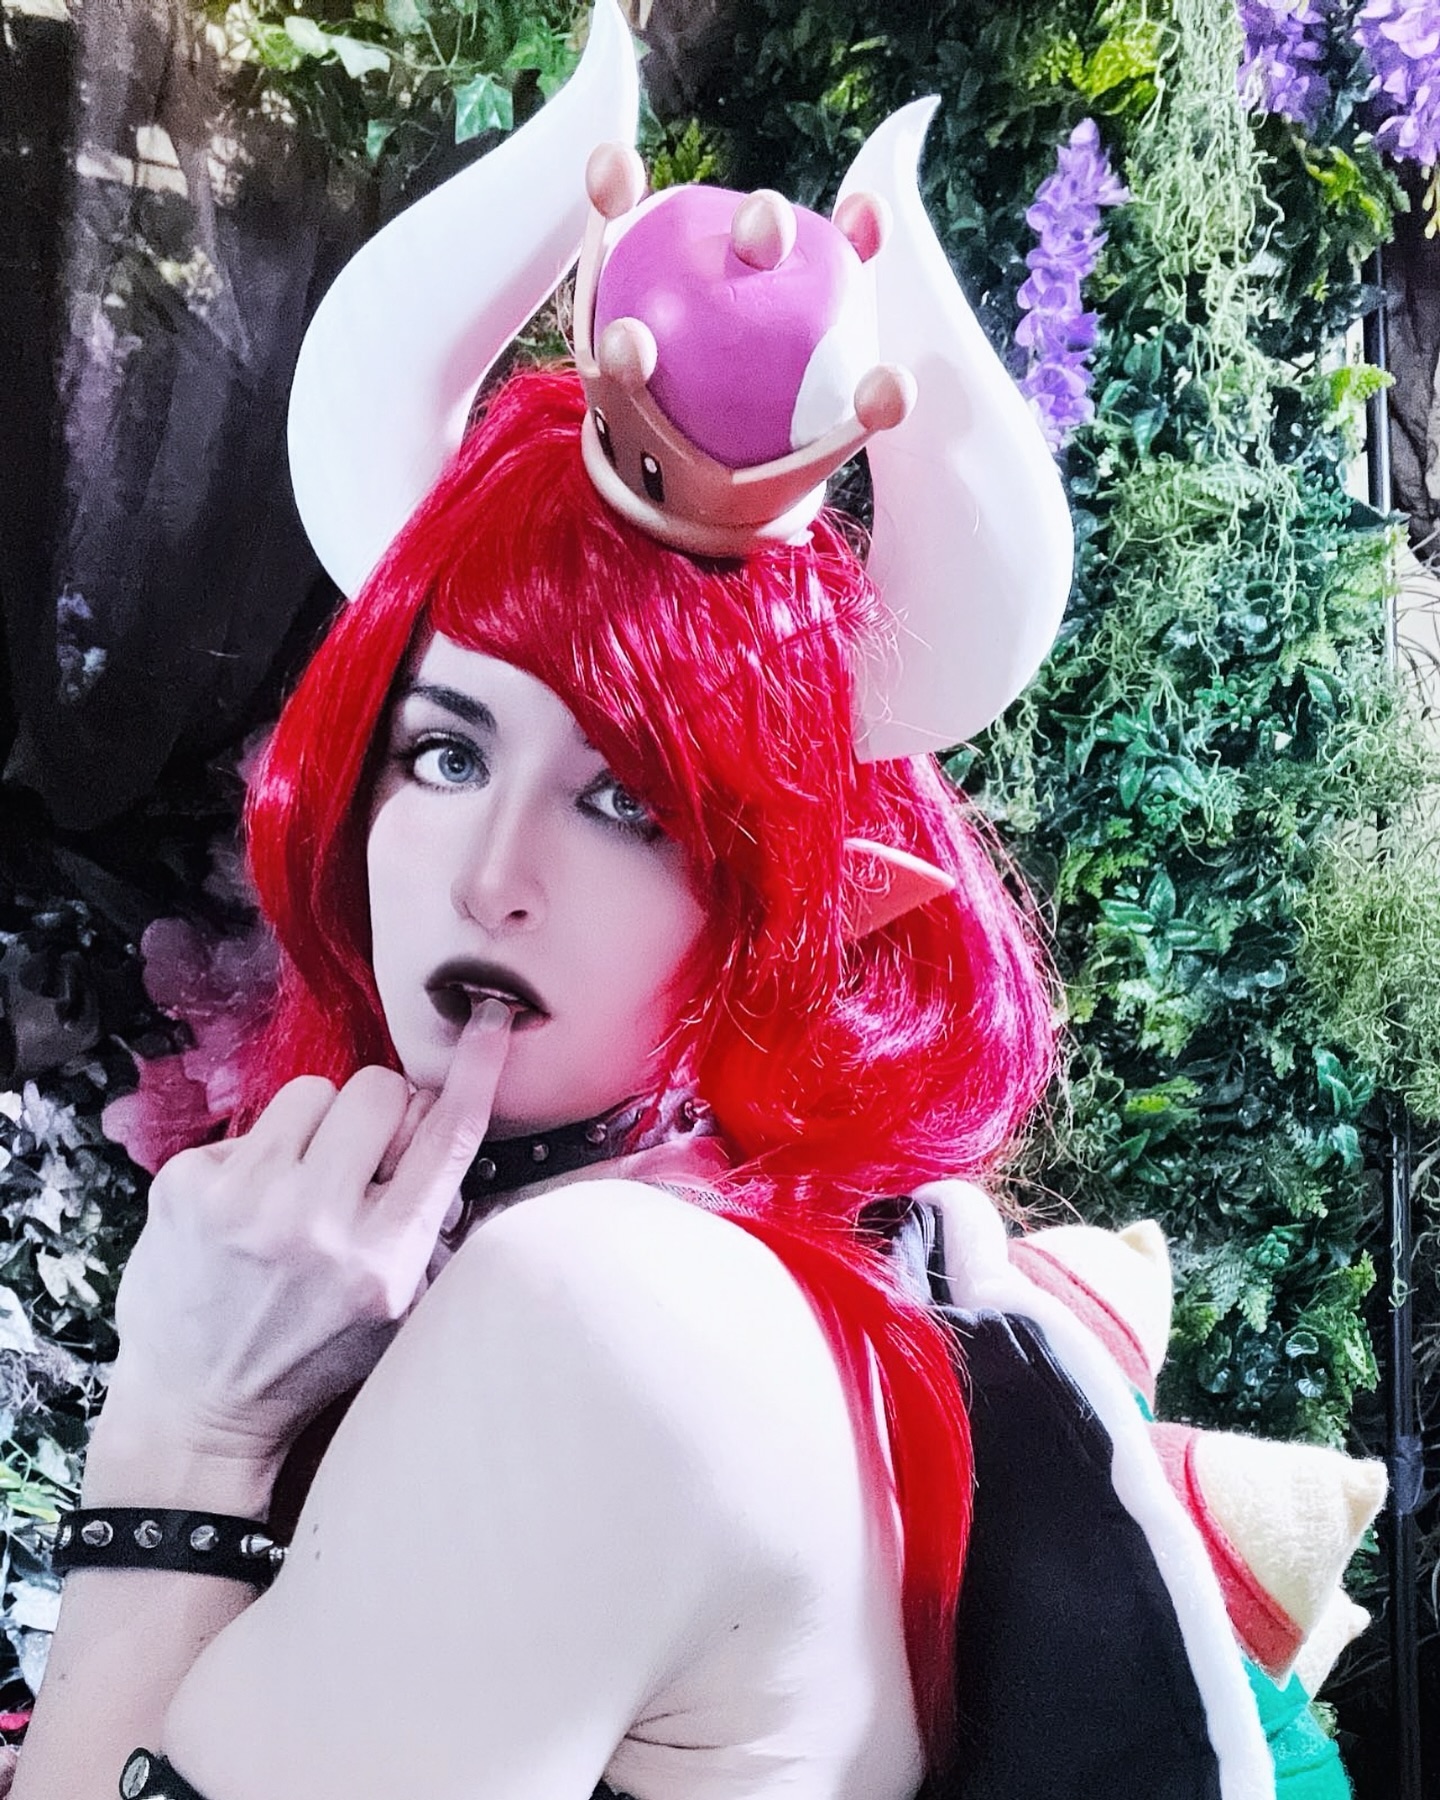 Do you want a strong powerful Queen or some dainty Princess? 👑 #bowsette #bowsettecosplay #cosplay #mariobros #crossplay